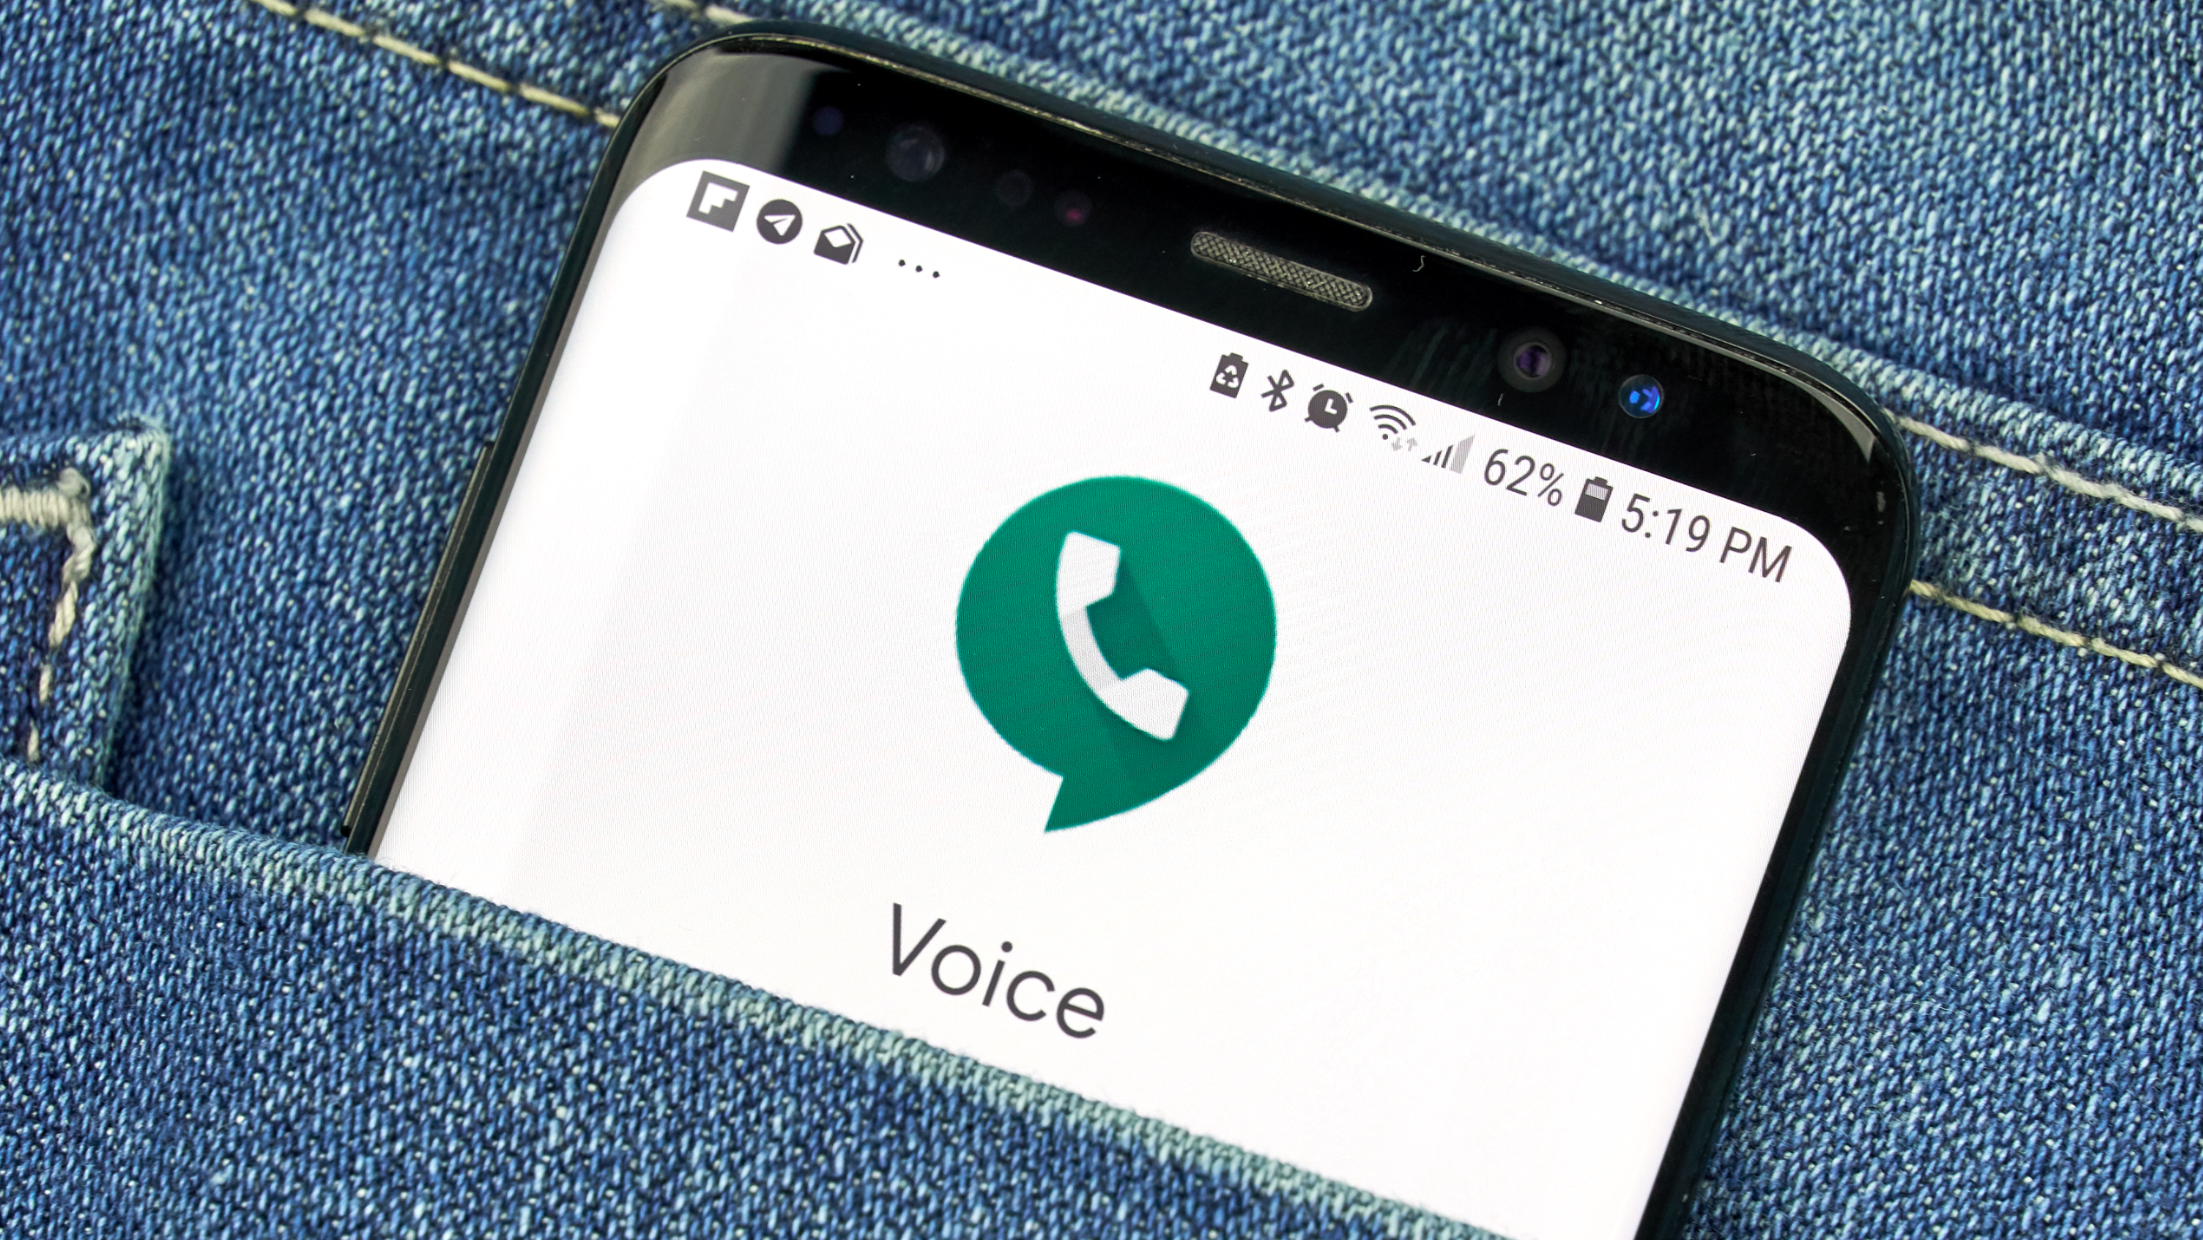 Legendary Google Voice users should get set for a shaky transition